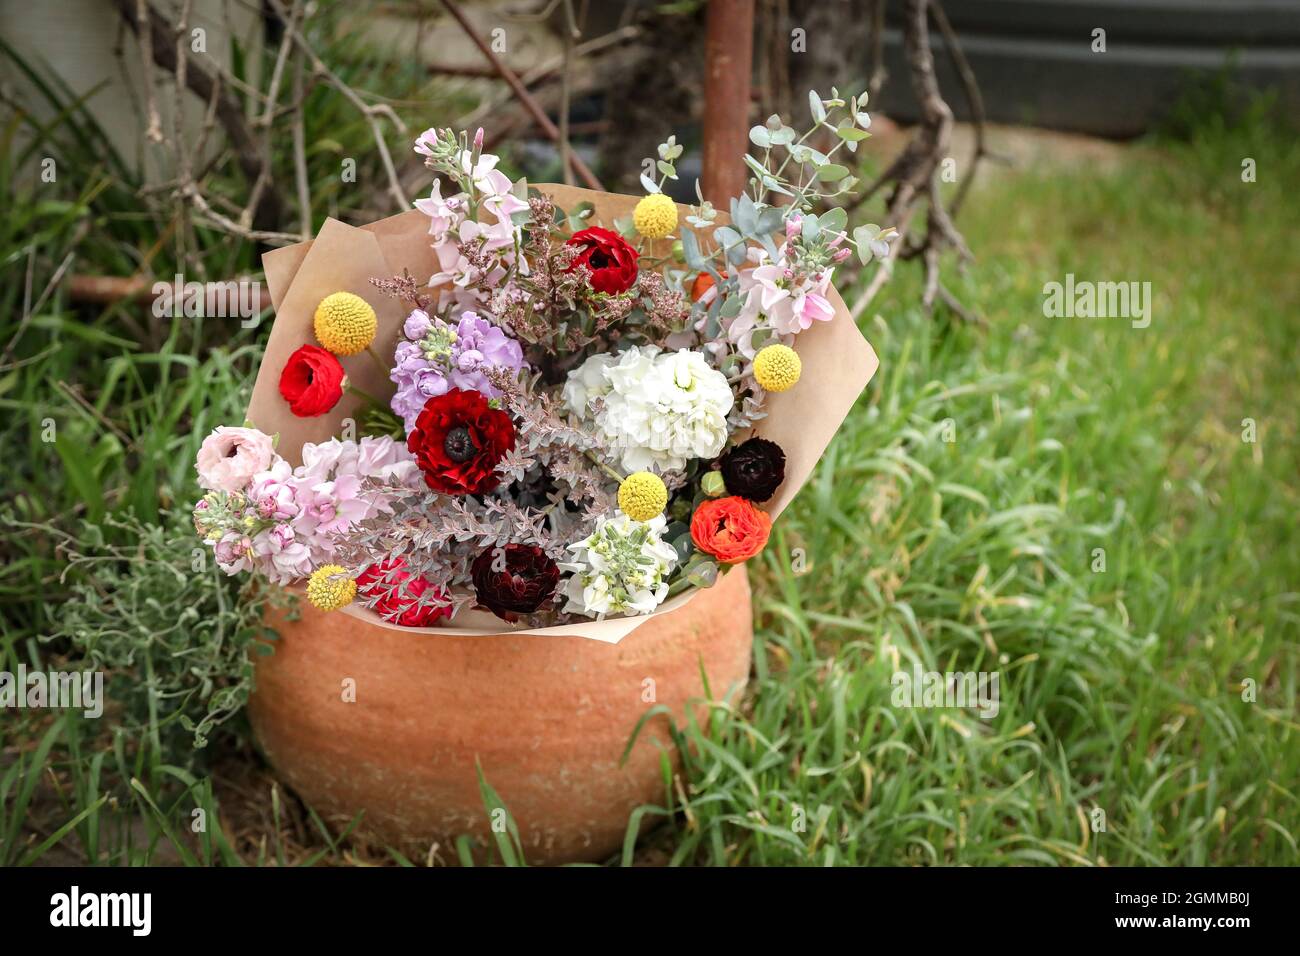 Bunch of beautiful cottage cut flowers in rustic country setting Stock Photo